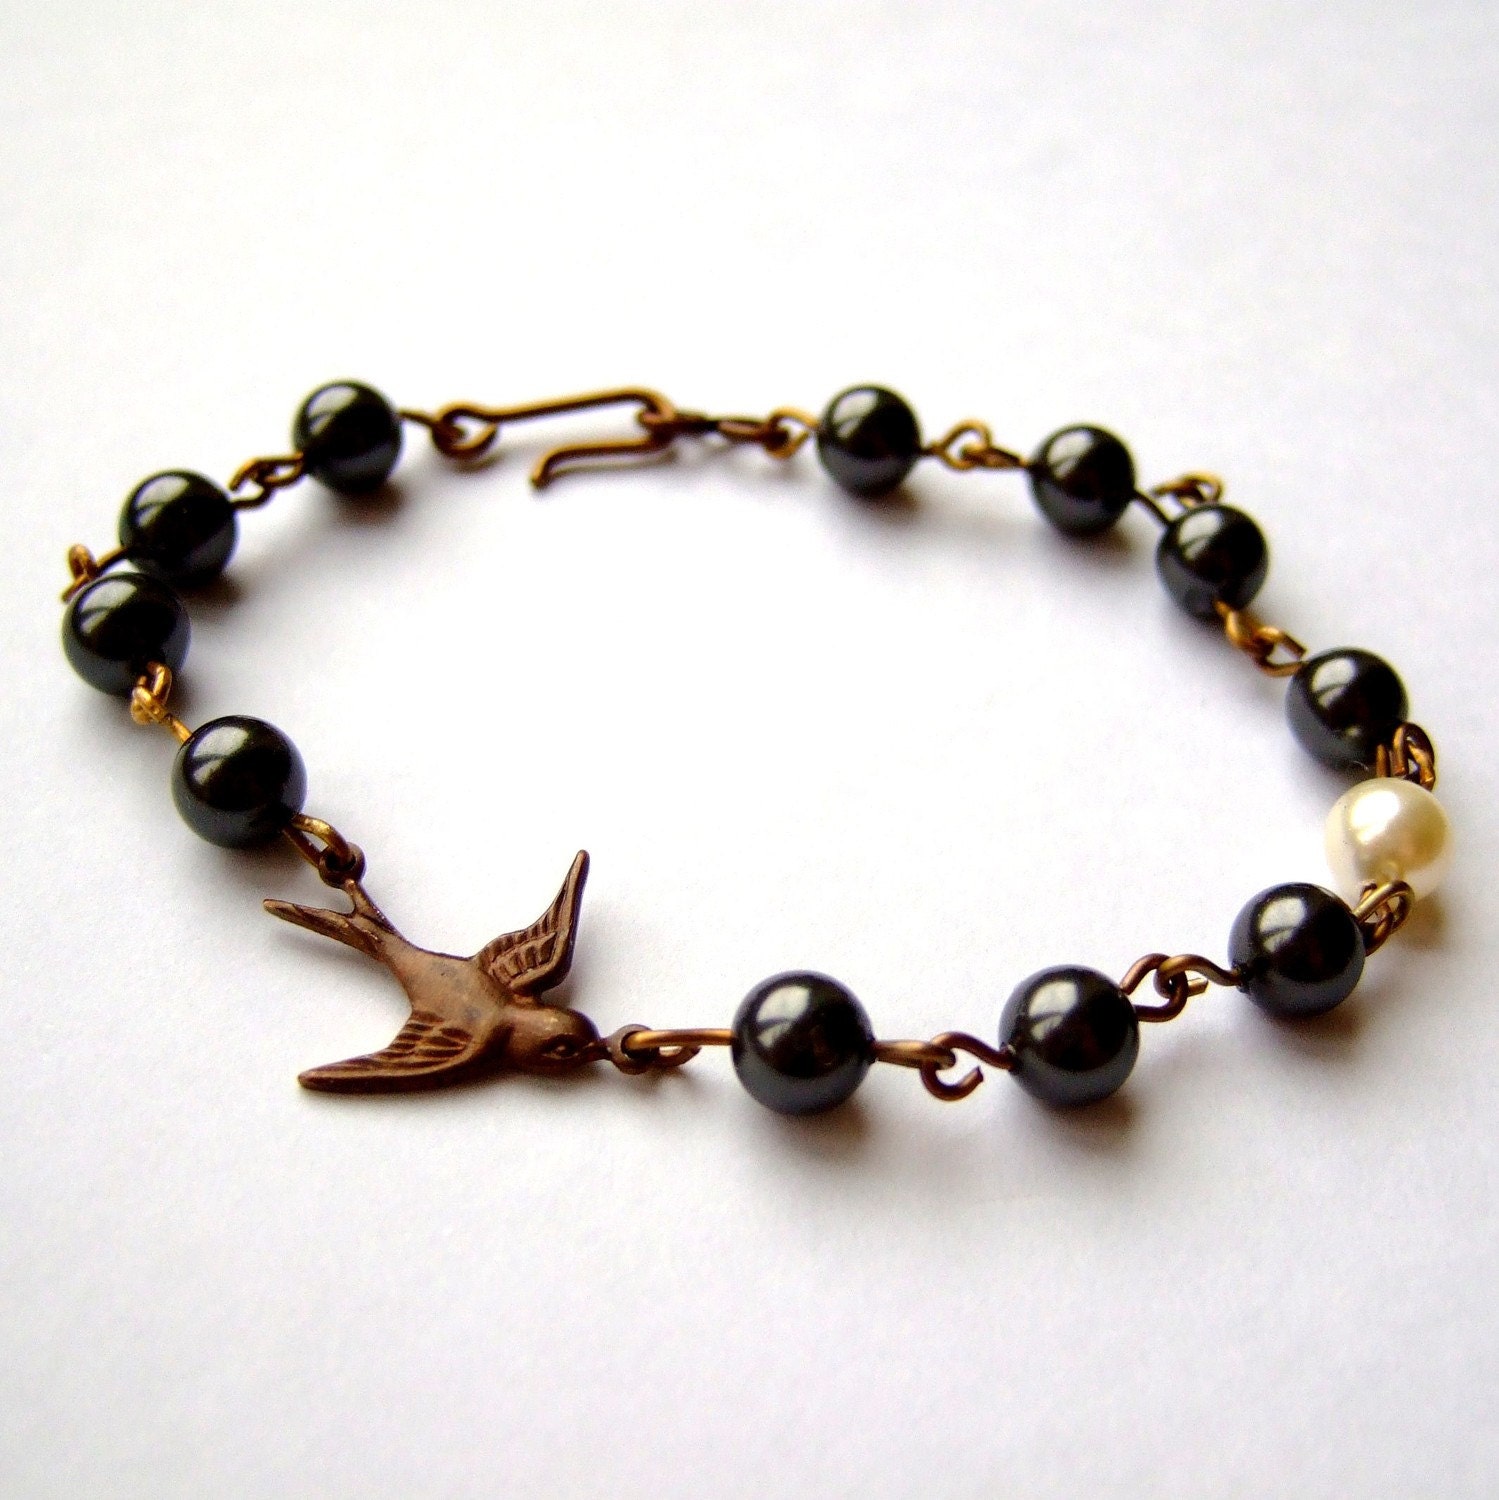 Brass swallow and Swarovski pearl bracelet - "Fly Me To The Moon"